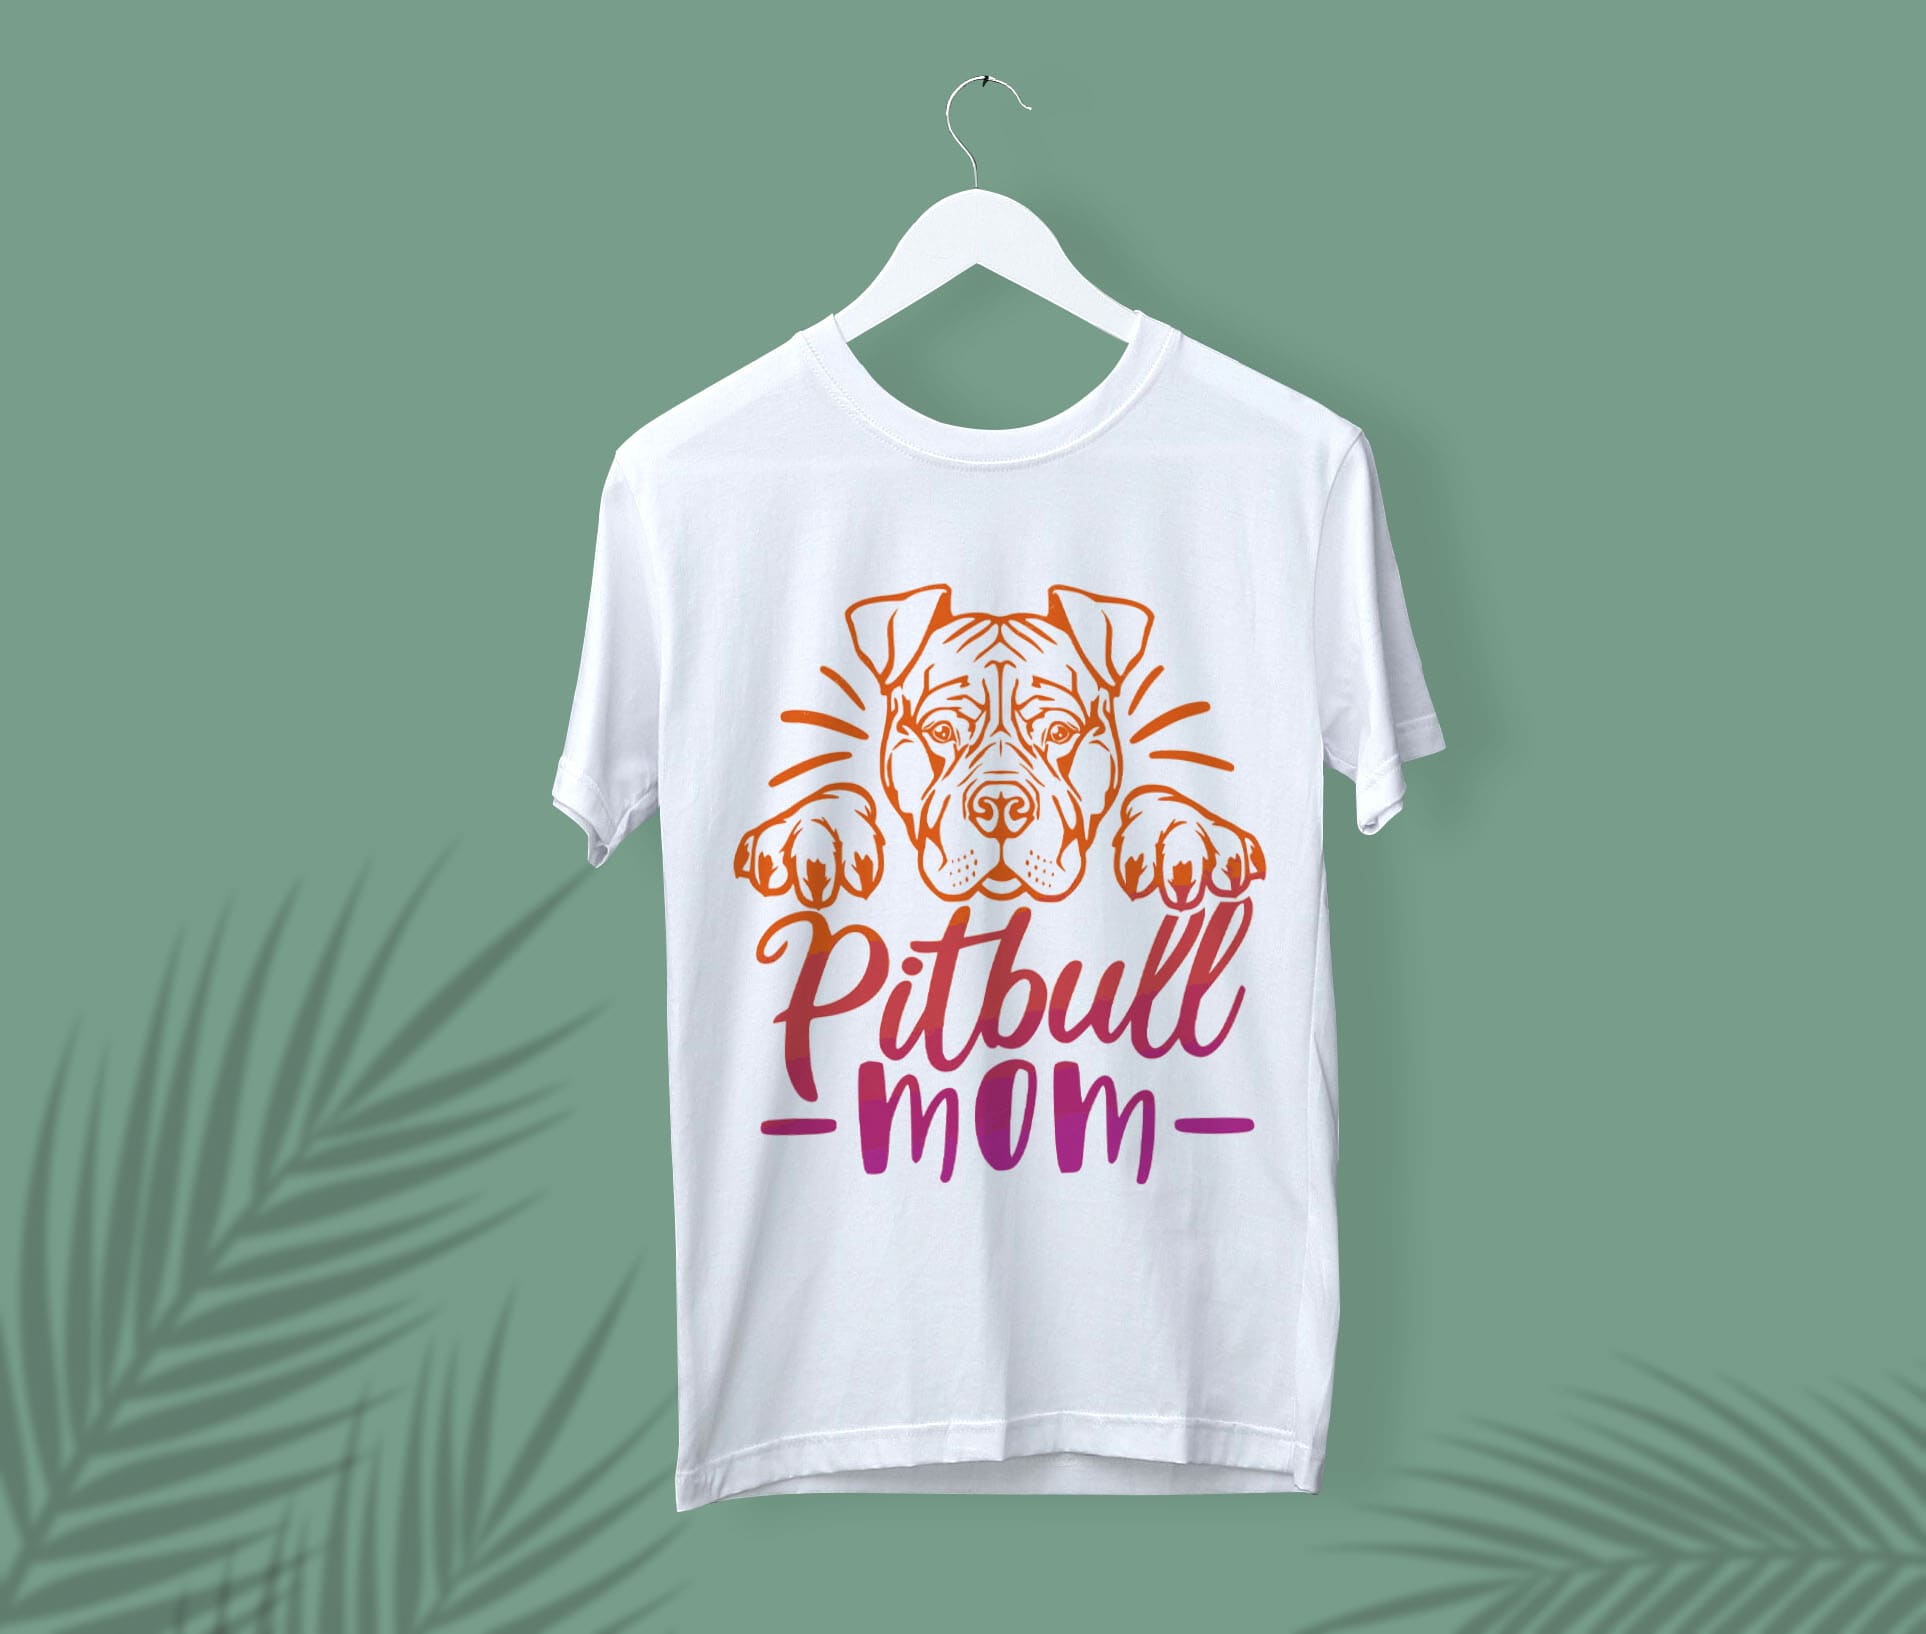 White t-shirt with an orange and pink pitbull mom face on a white hanger, on a green background.